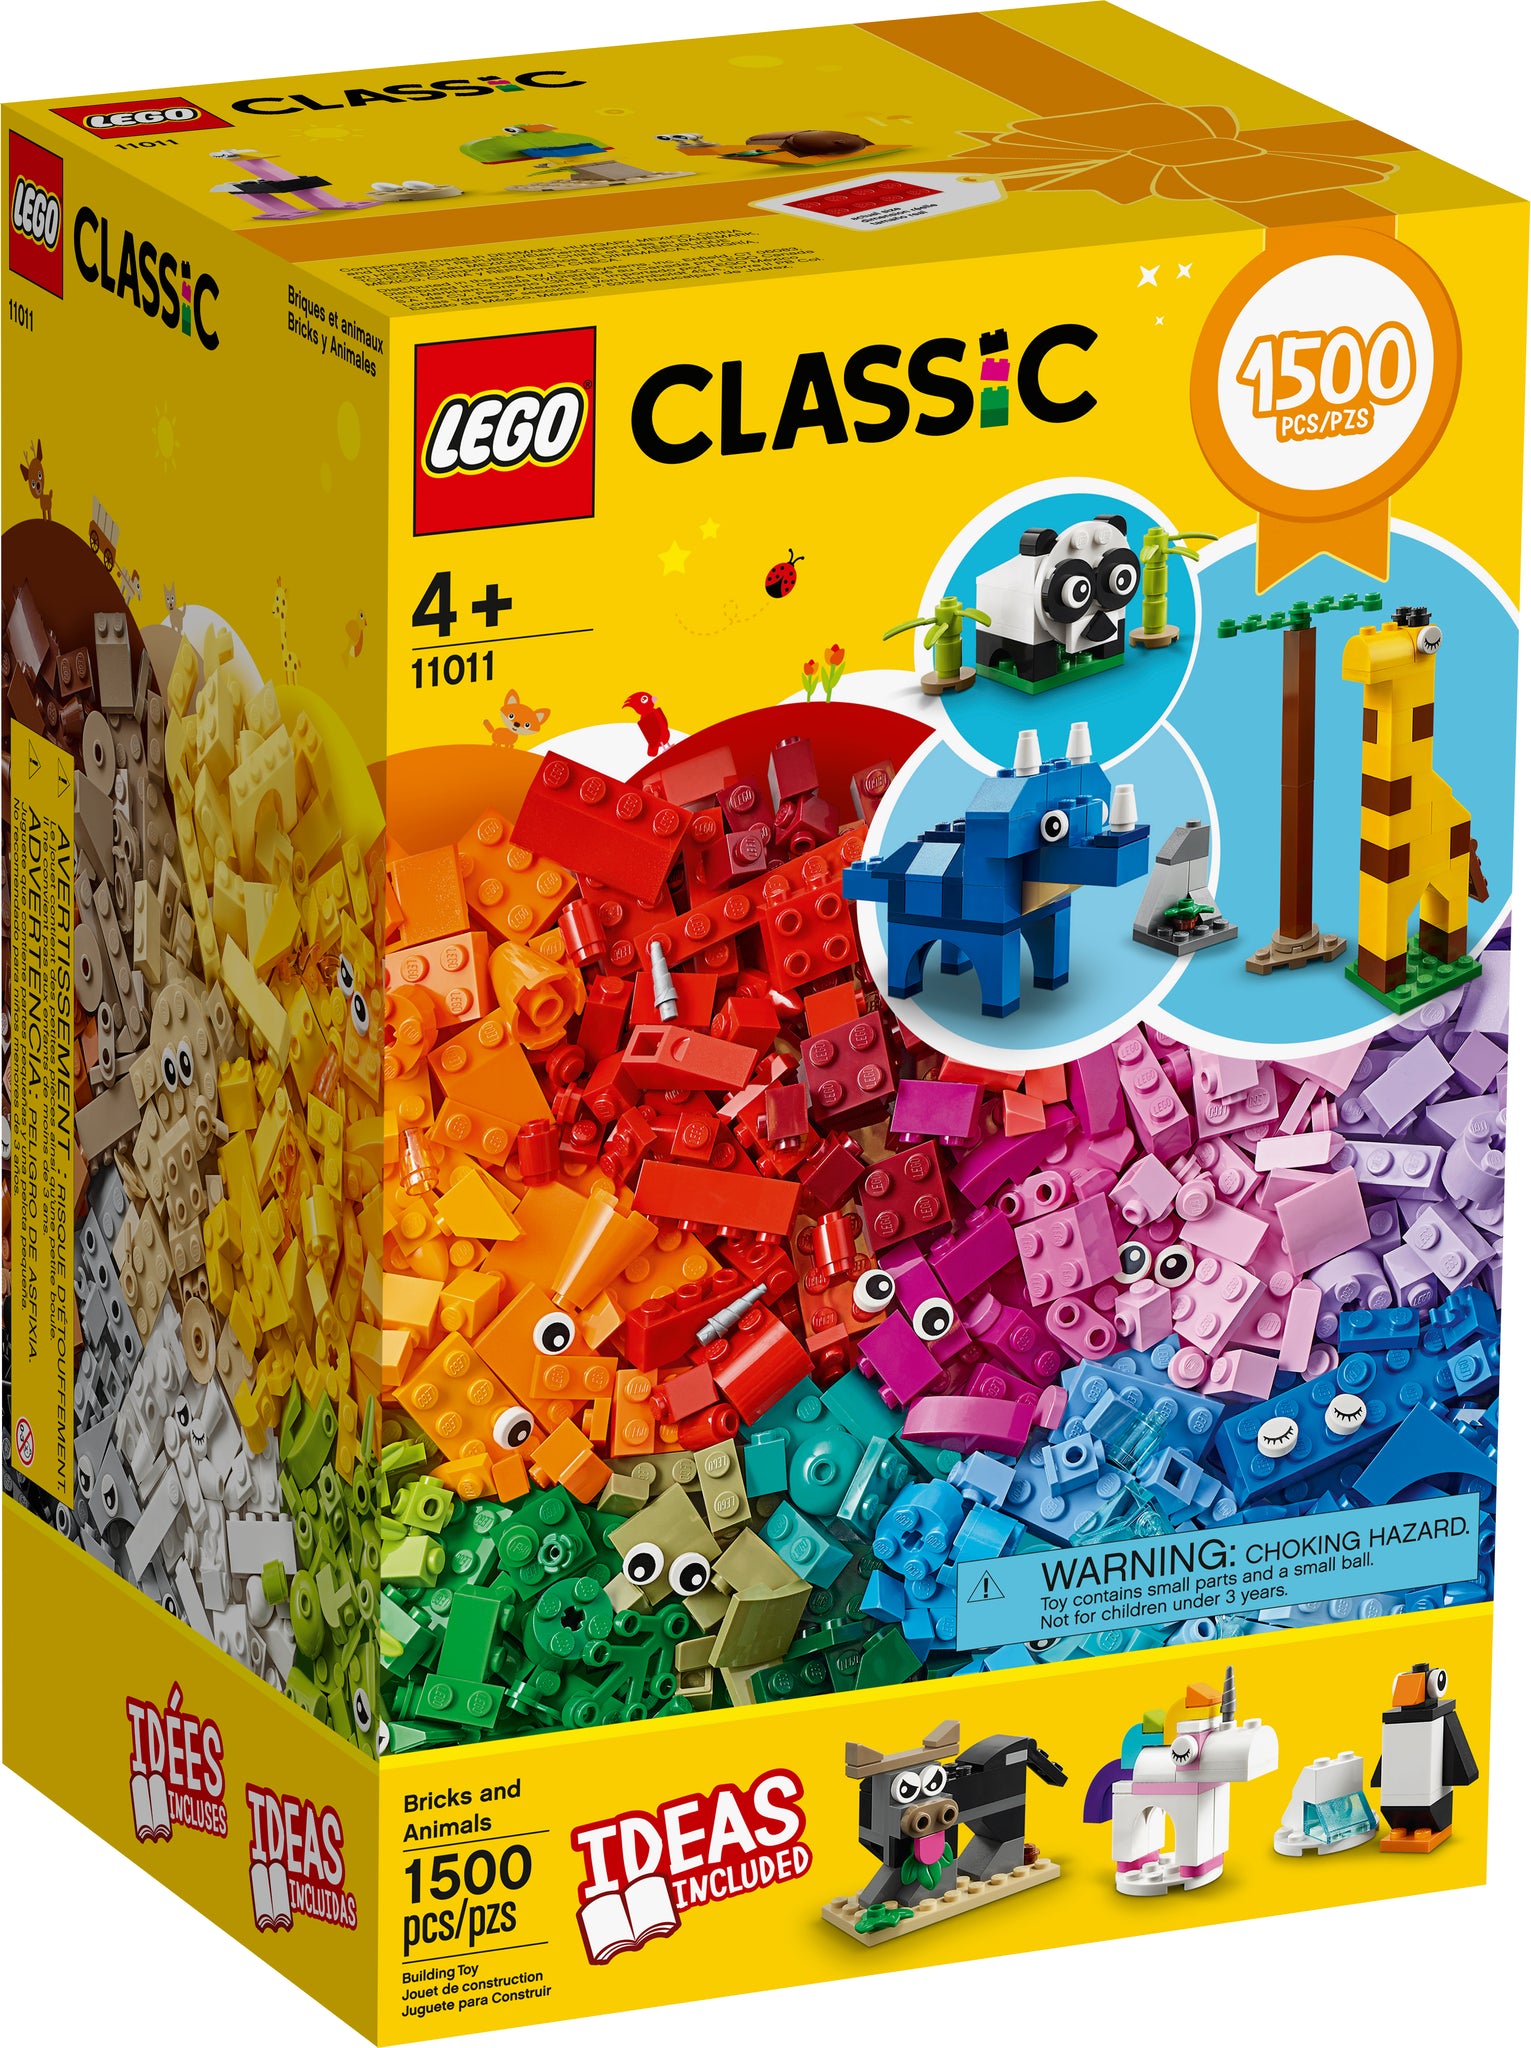 LEGO® CLASSIC 11011 Bricks and Animals (1500 pieces) – AESOP'S FABLE